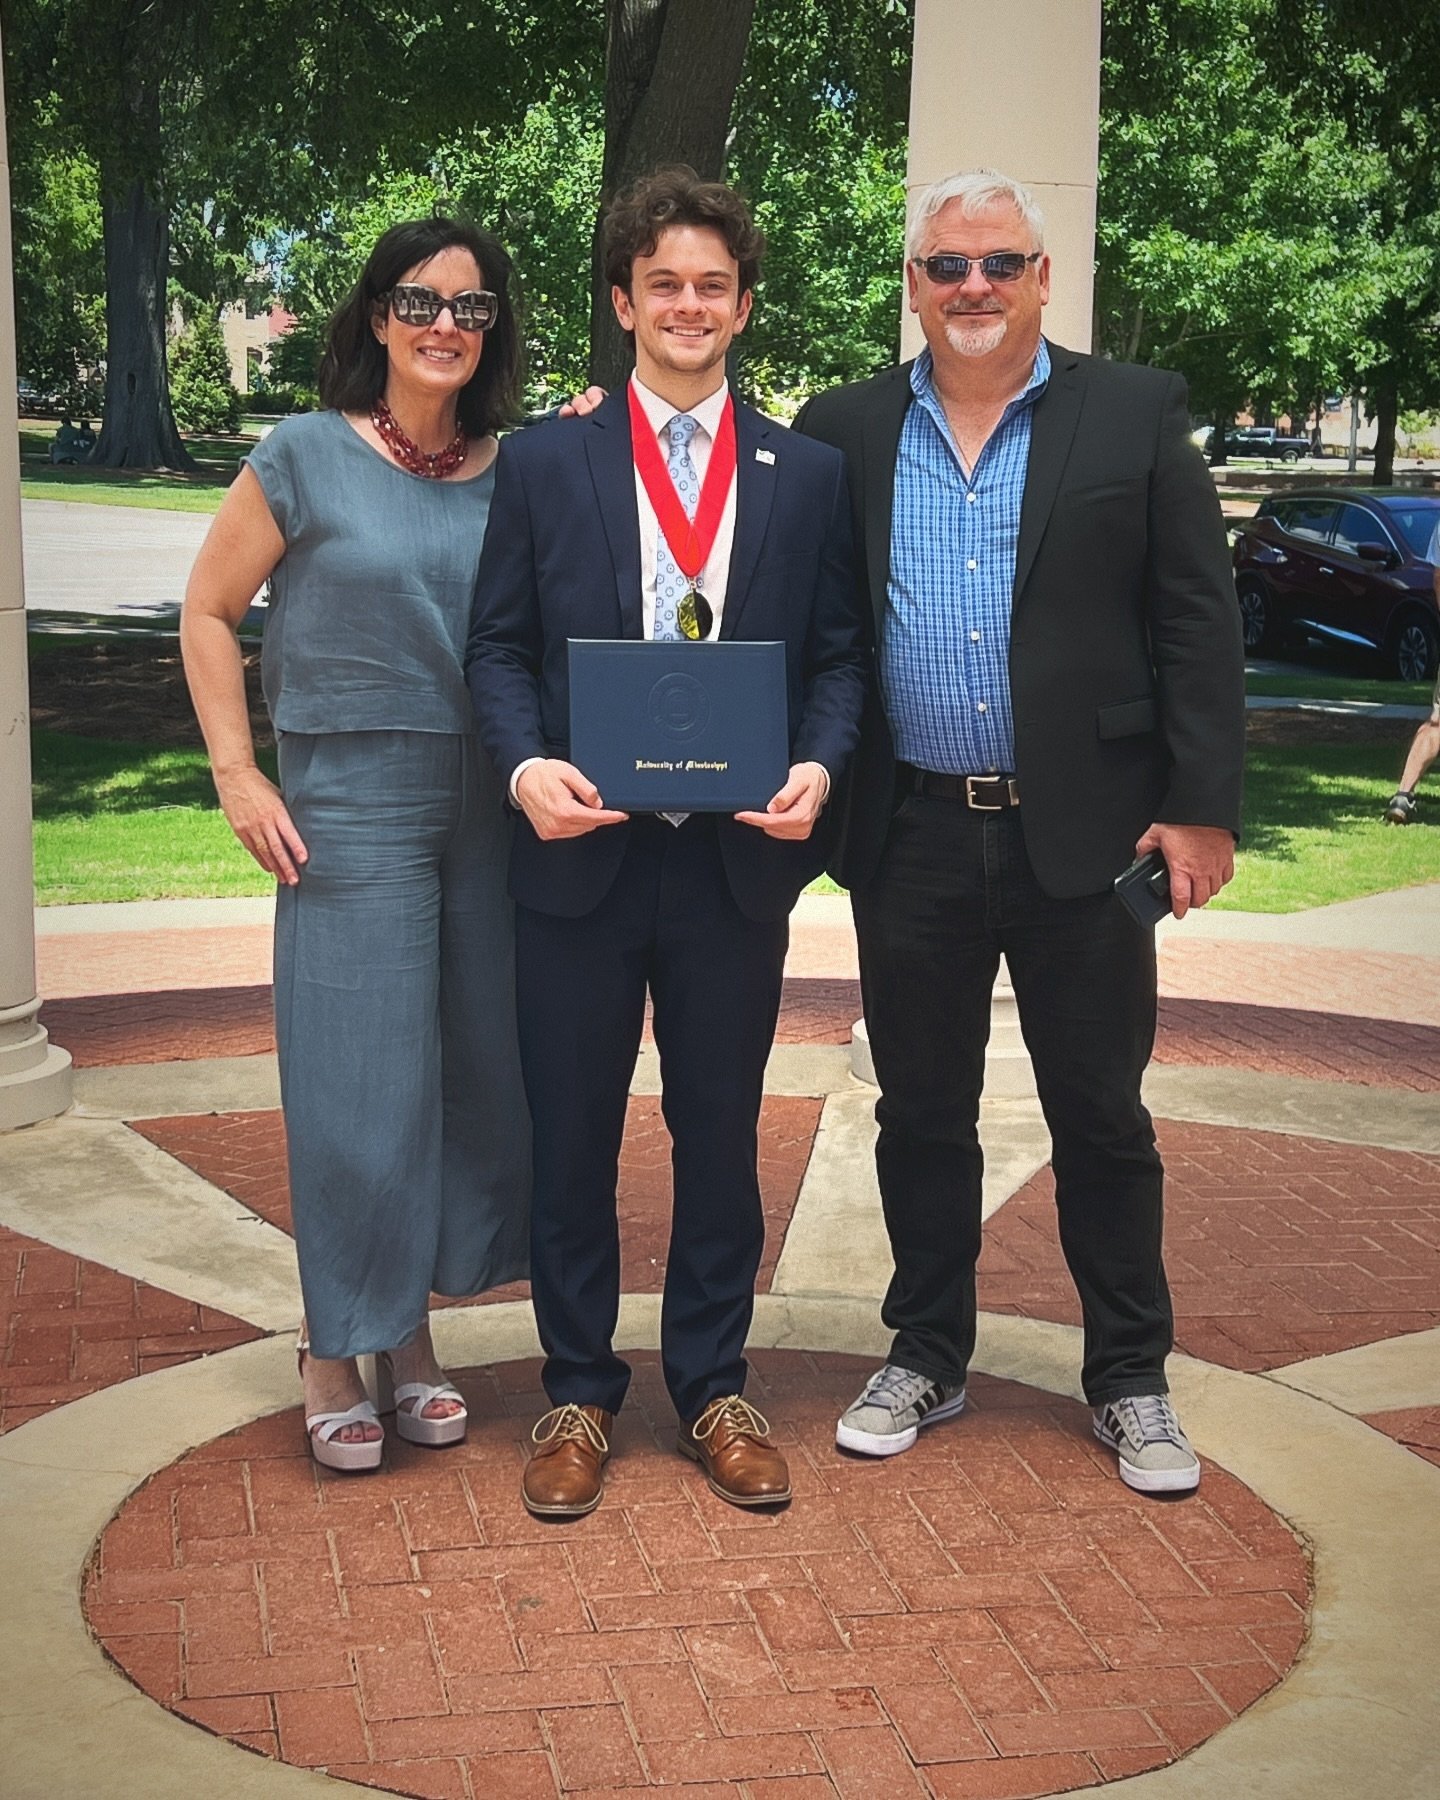 Hotty Toddy! Our boy had his CME (Center for Manufacturing Excellence) ceremony today! Mechanical Engineering graduation tomorrow and then on to NYC! So proud of you and we love you so much!

#hottytoddy #olemiss #graduation2024 #soproudofyou❤️ #oxfo